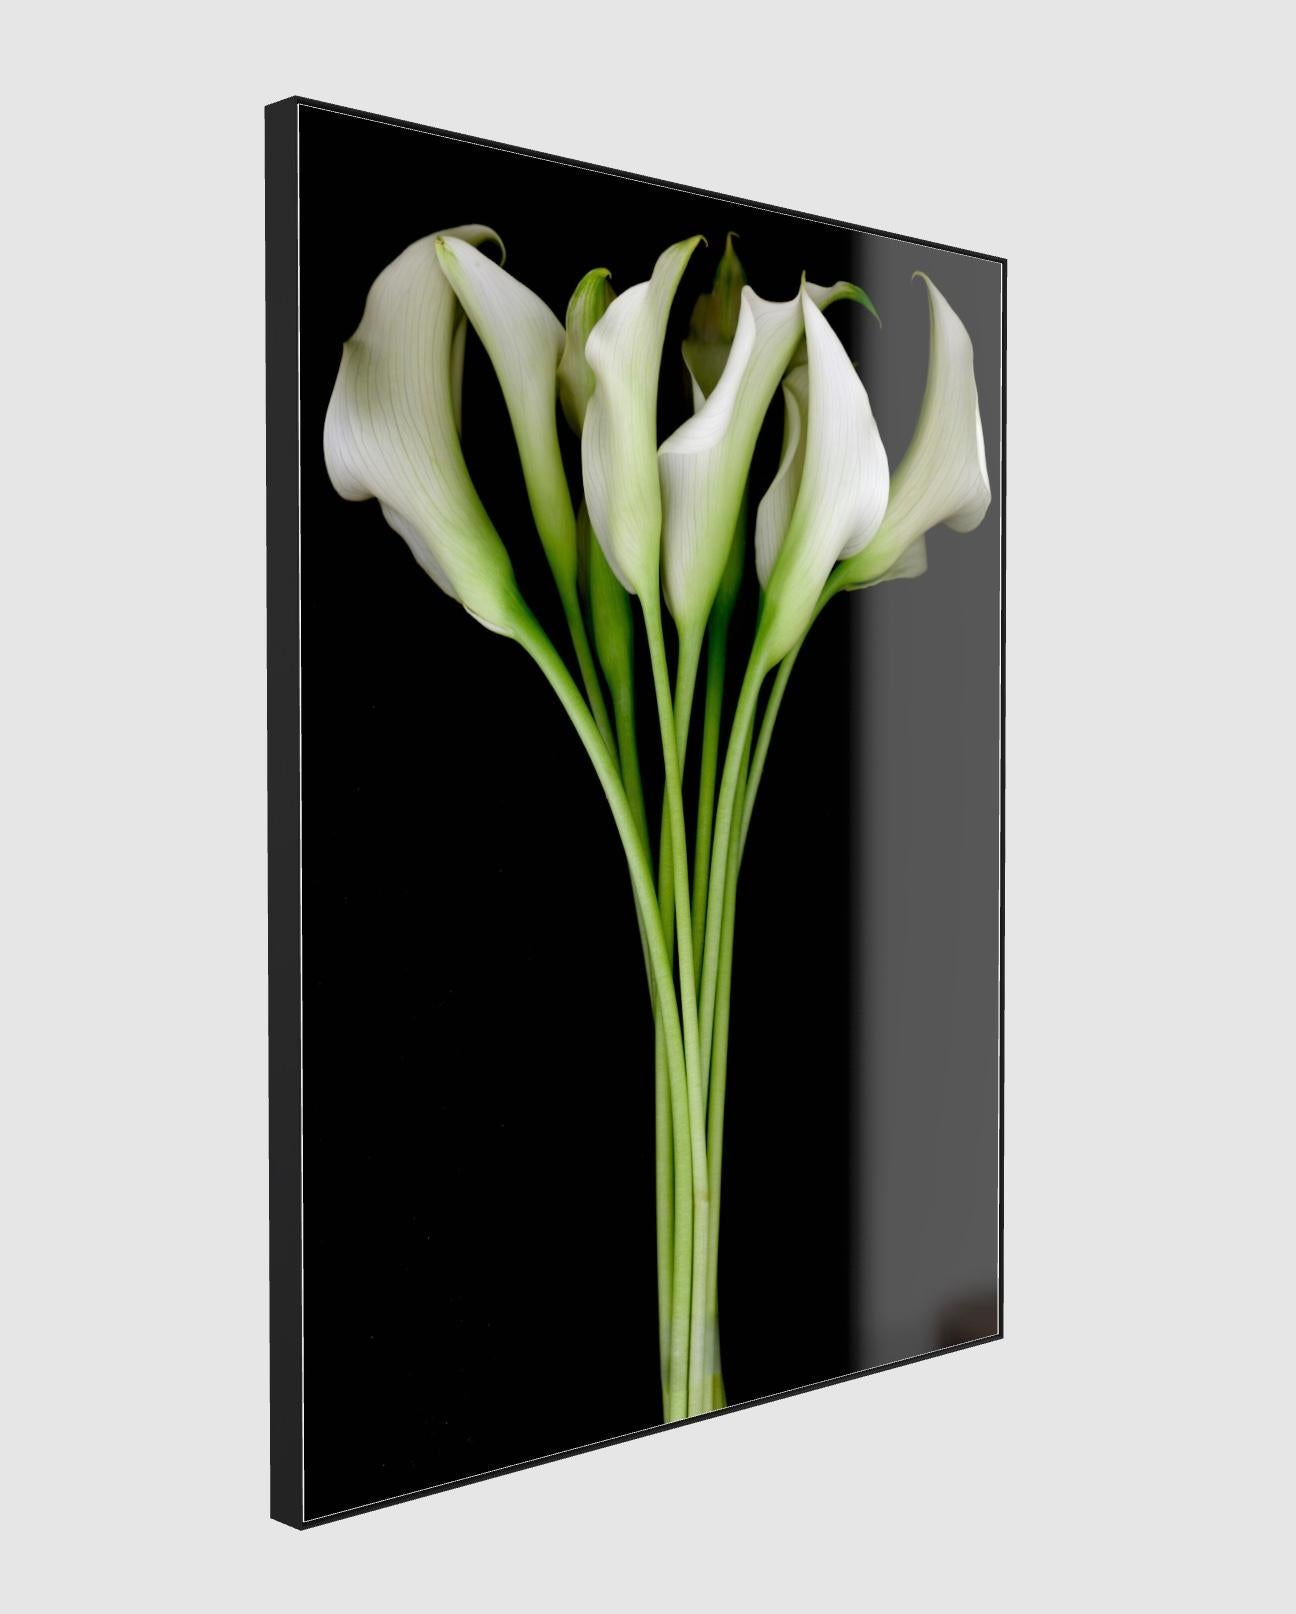 STILL ALIVE WHITE - under Acrylic Glass - Black Color Photograph by Albert Delamour